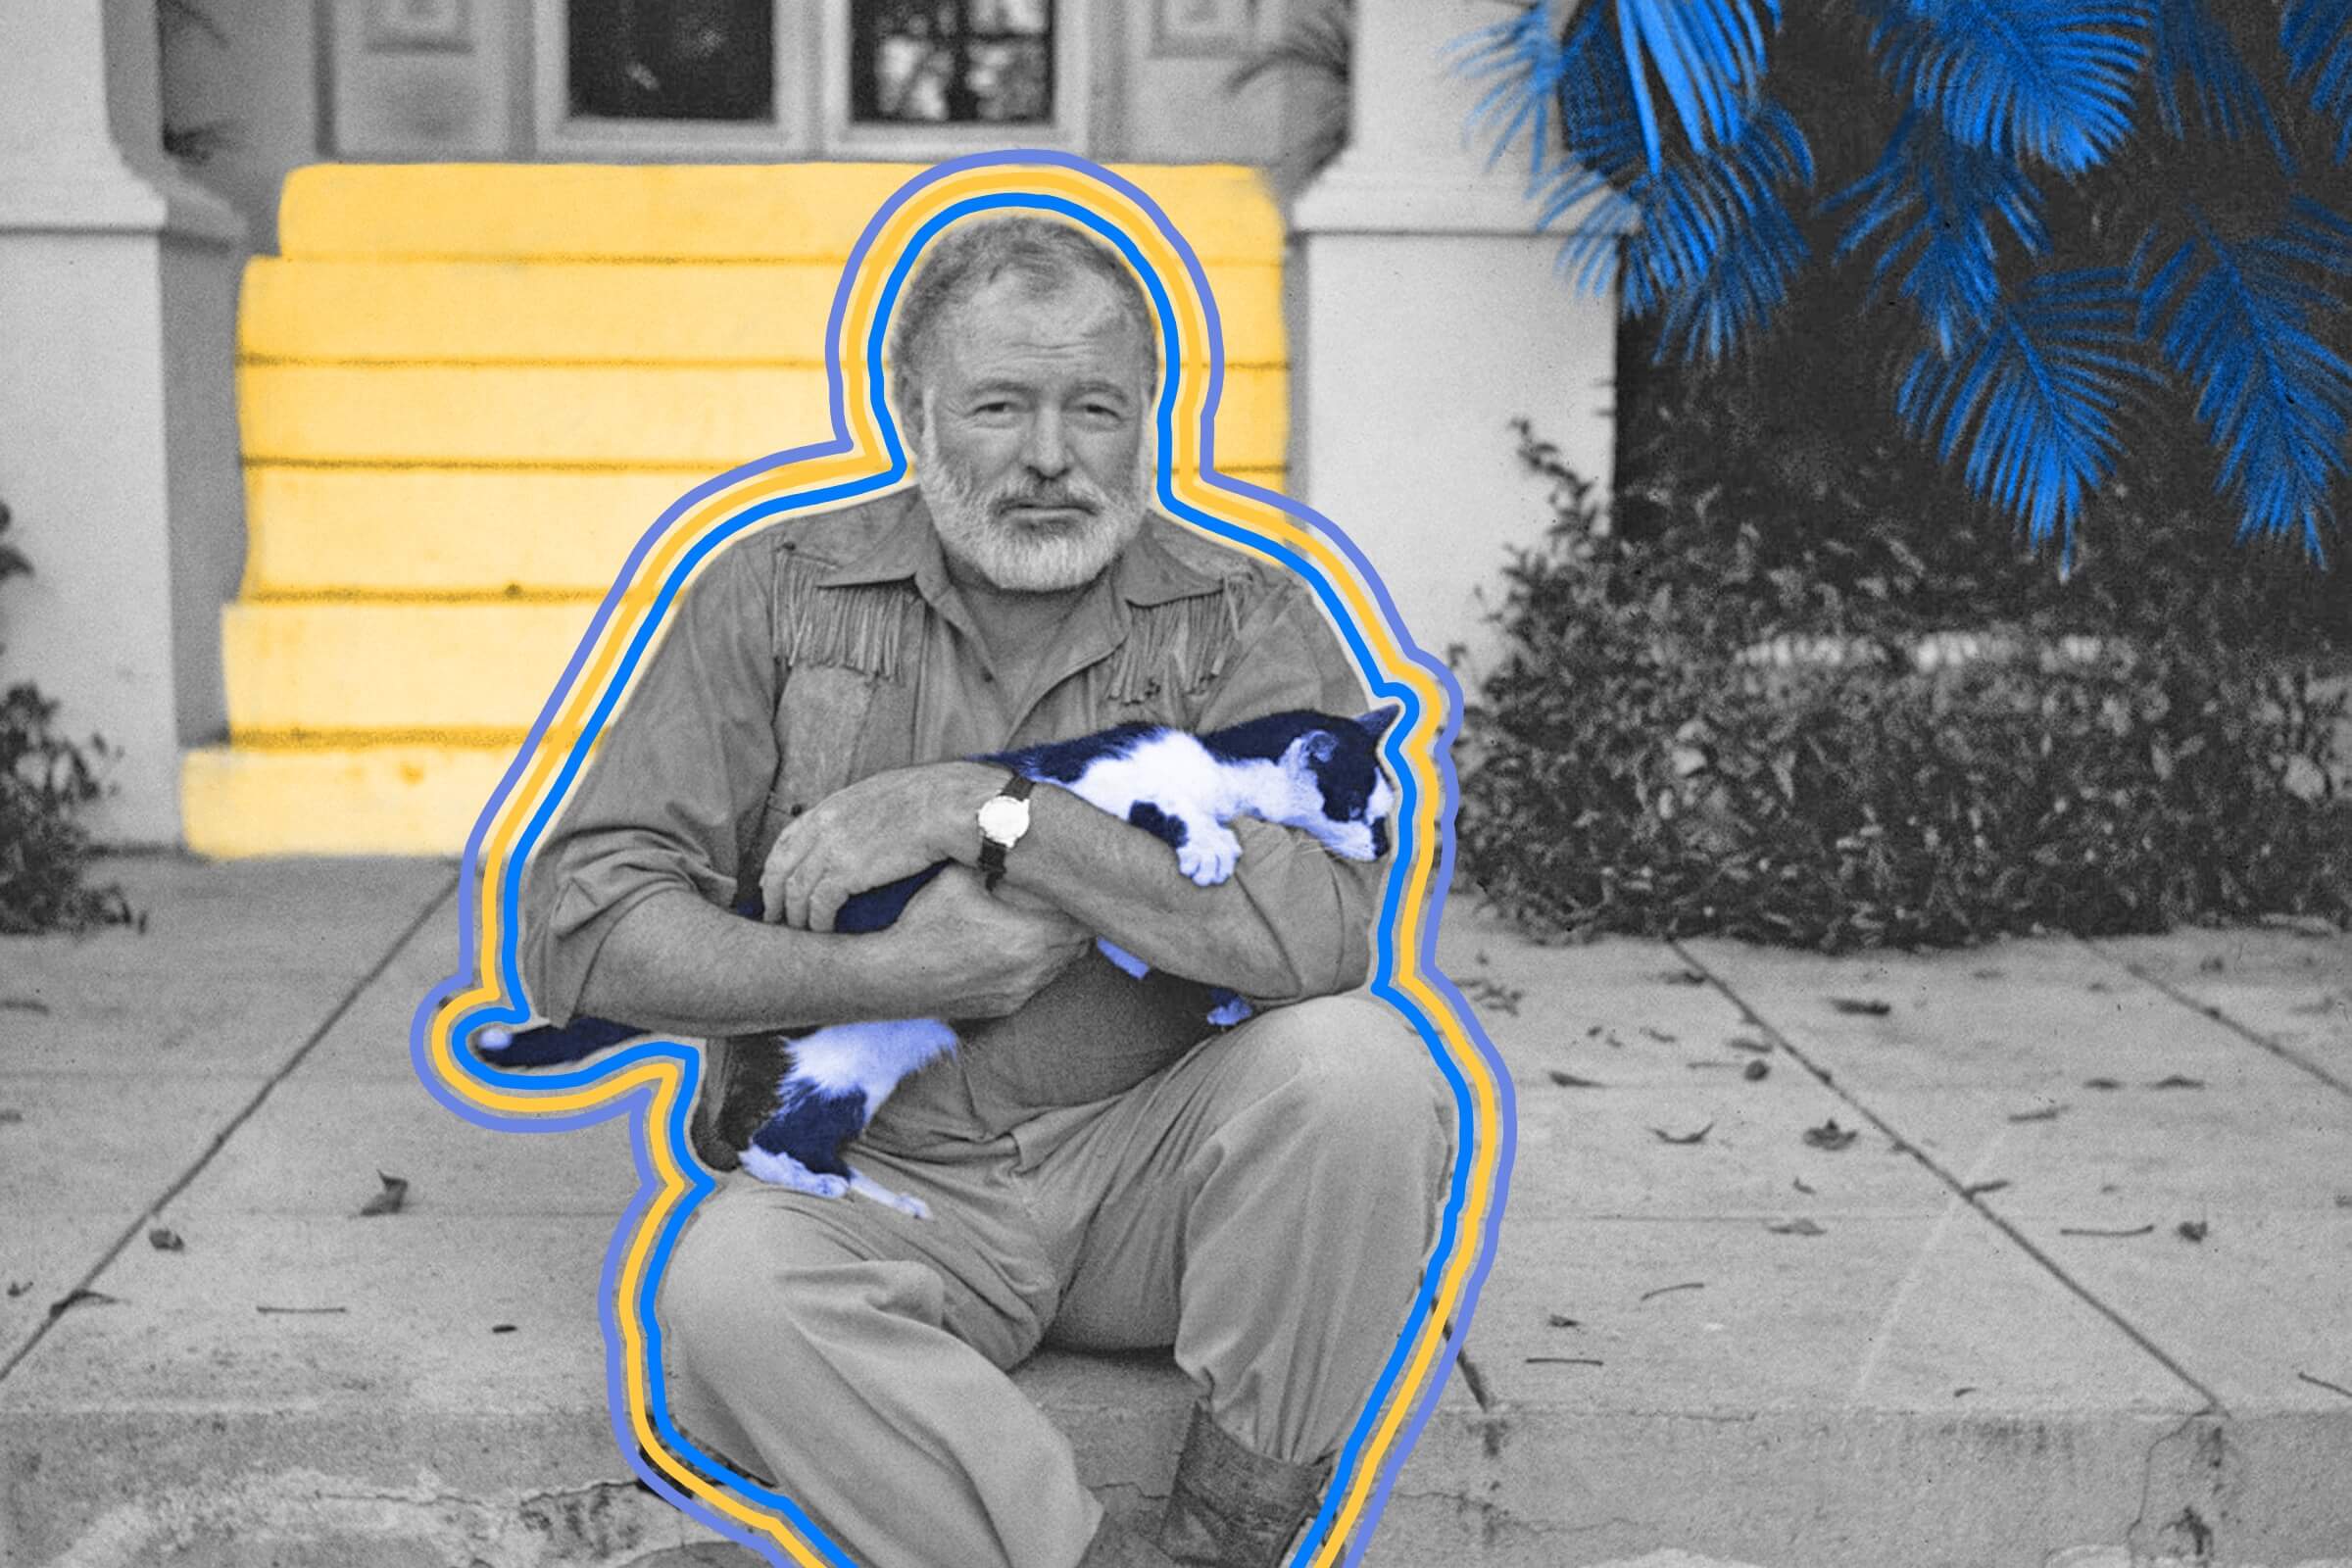 There are about 60 polydactyl cats living at the Ernest Hemingway Home and Museum in Florida.